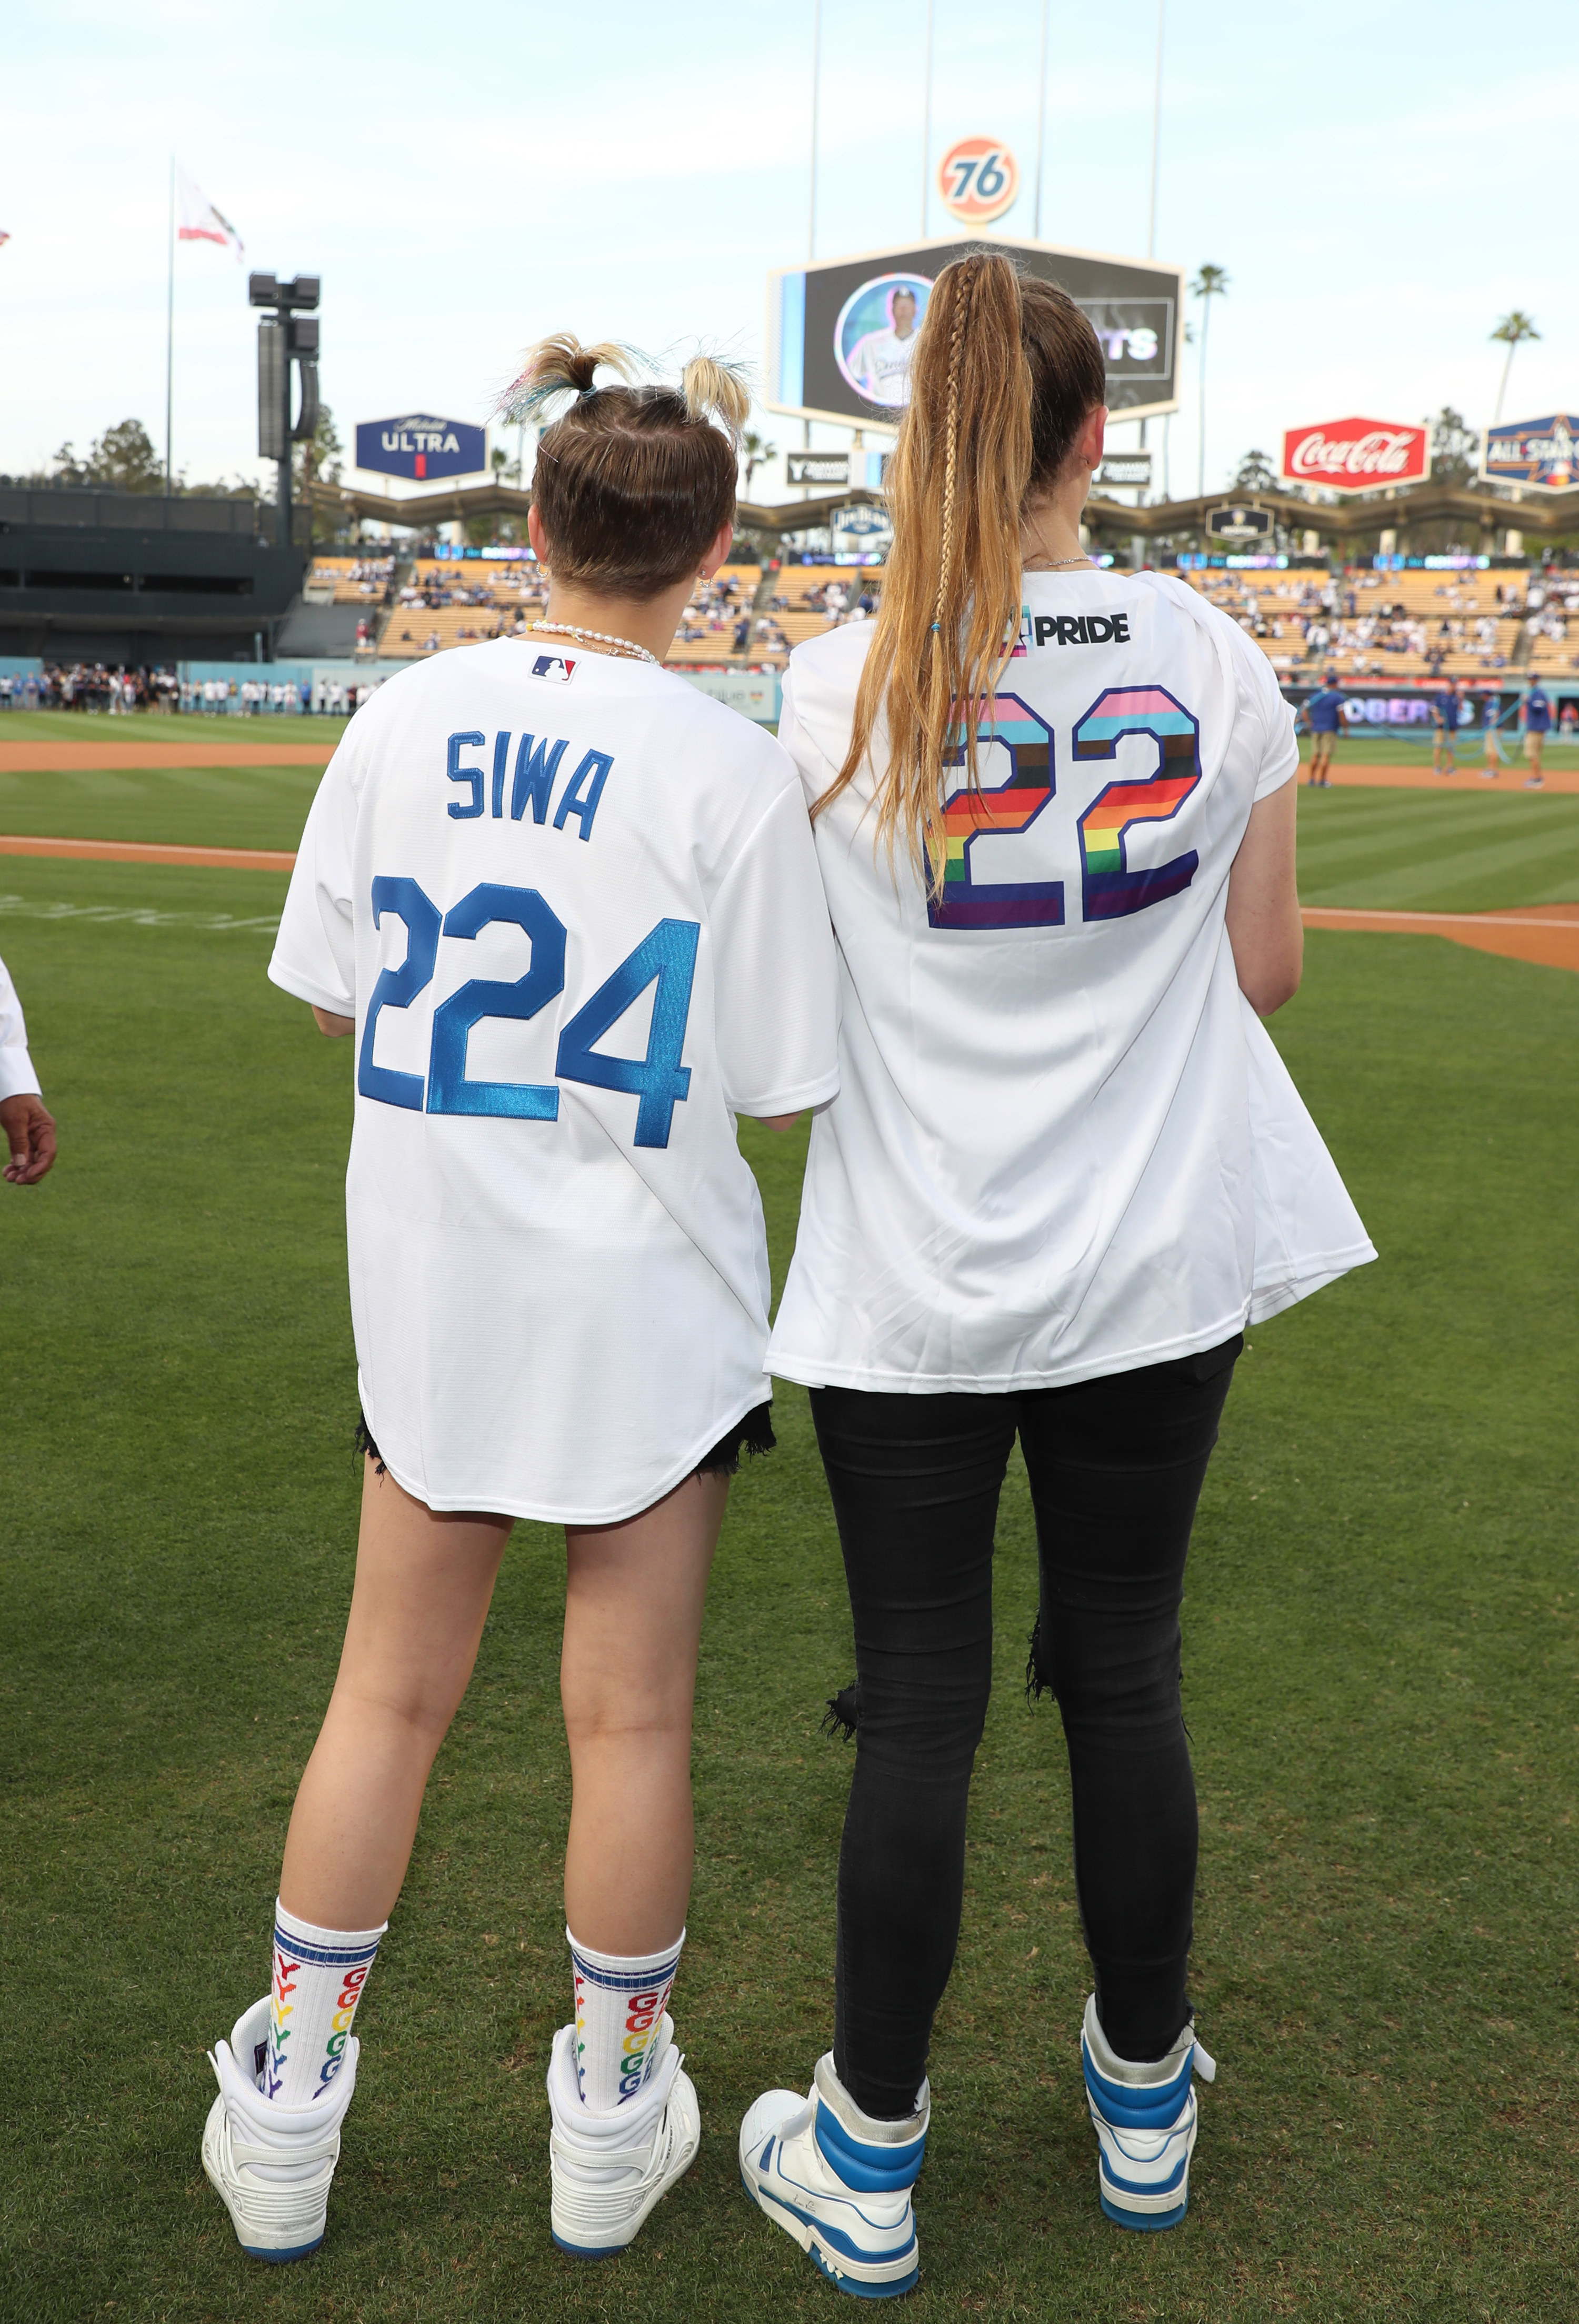 JoJo and Kylie from behind, where you can see that JoJo is wearing a custom jersey with her last name and Kylie&#x27;s says &quot;Pride&quot; where the name would normally be